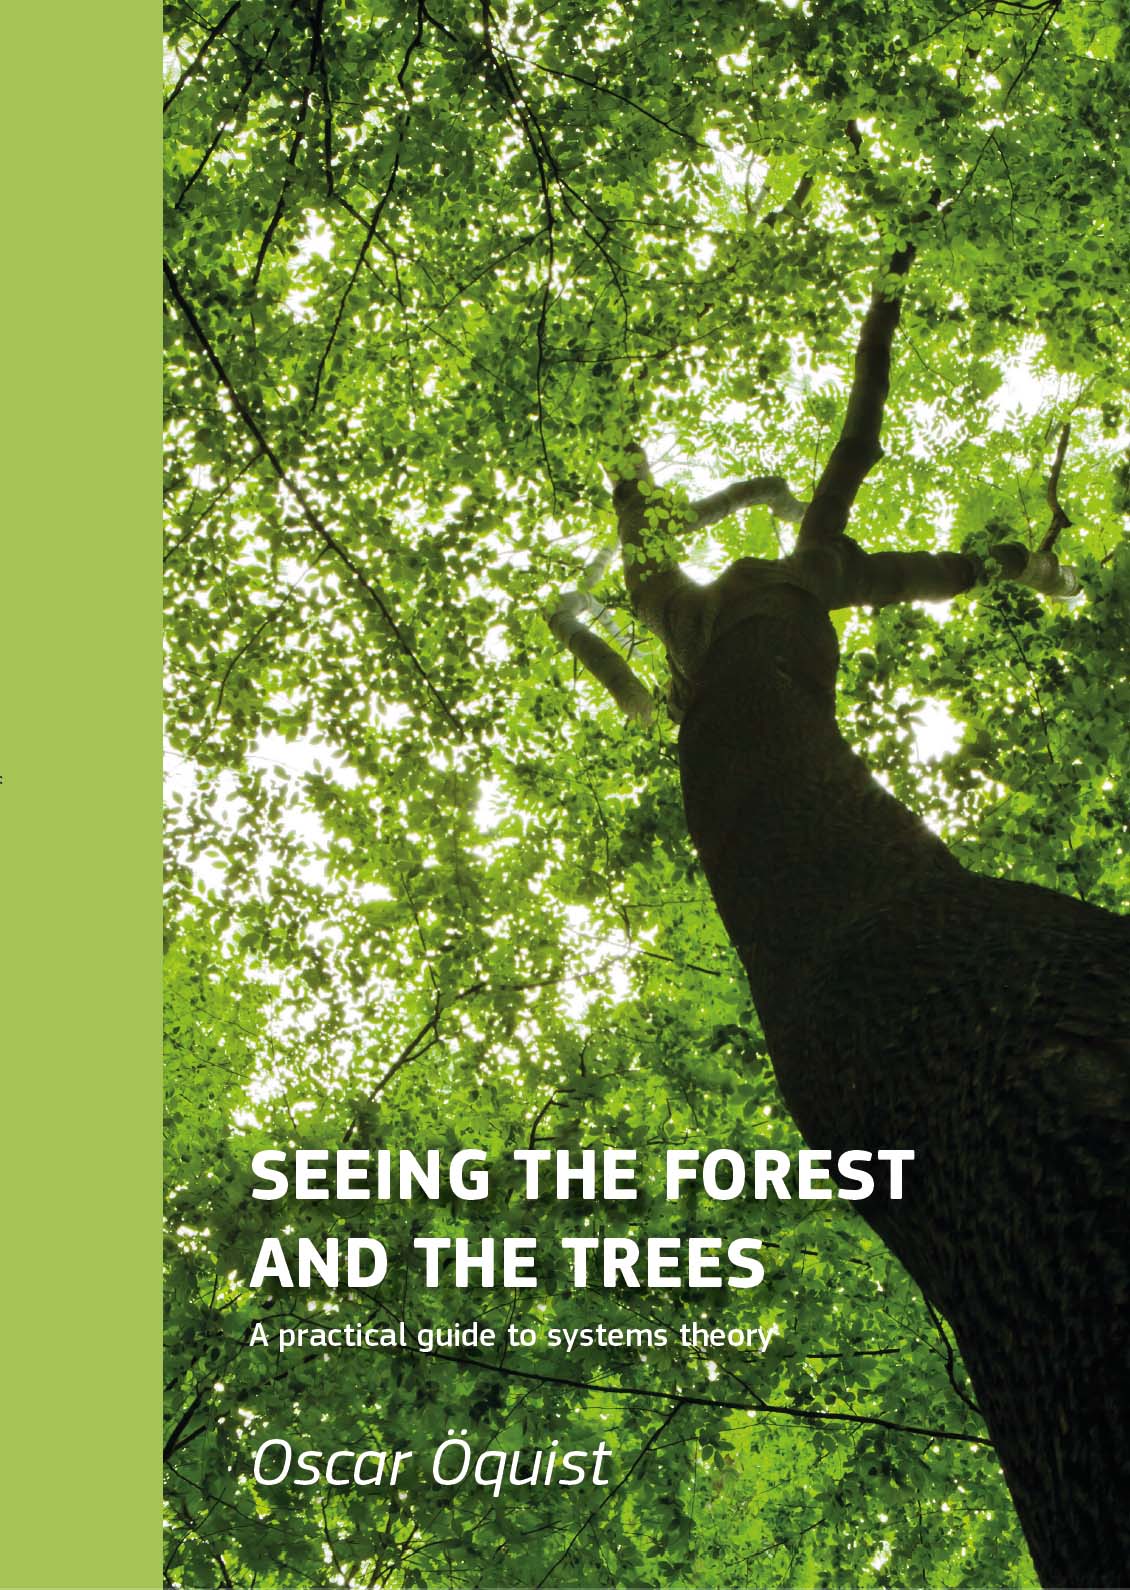 Forest for the Trees [Book]